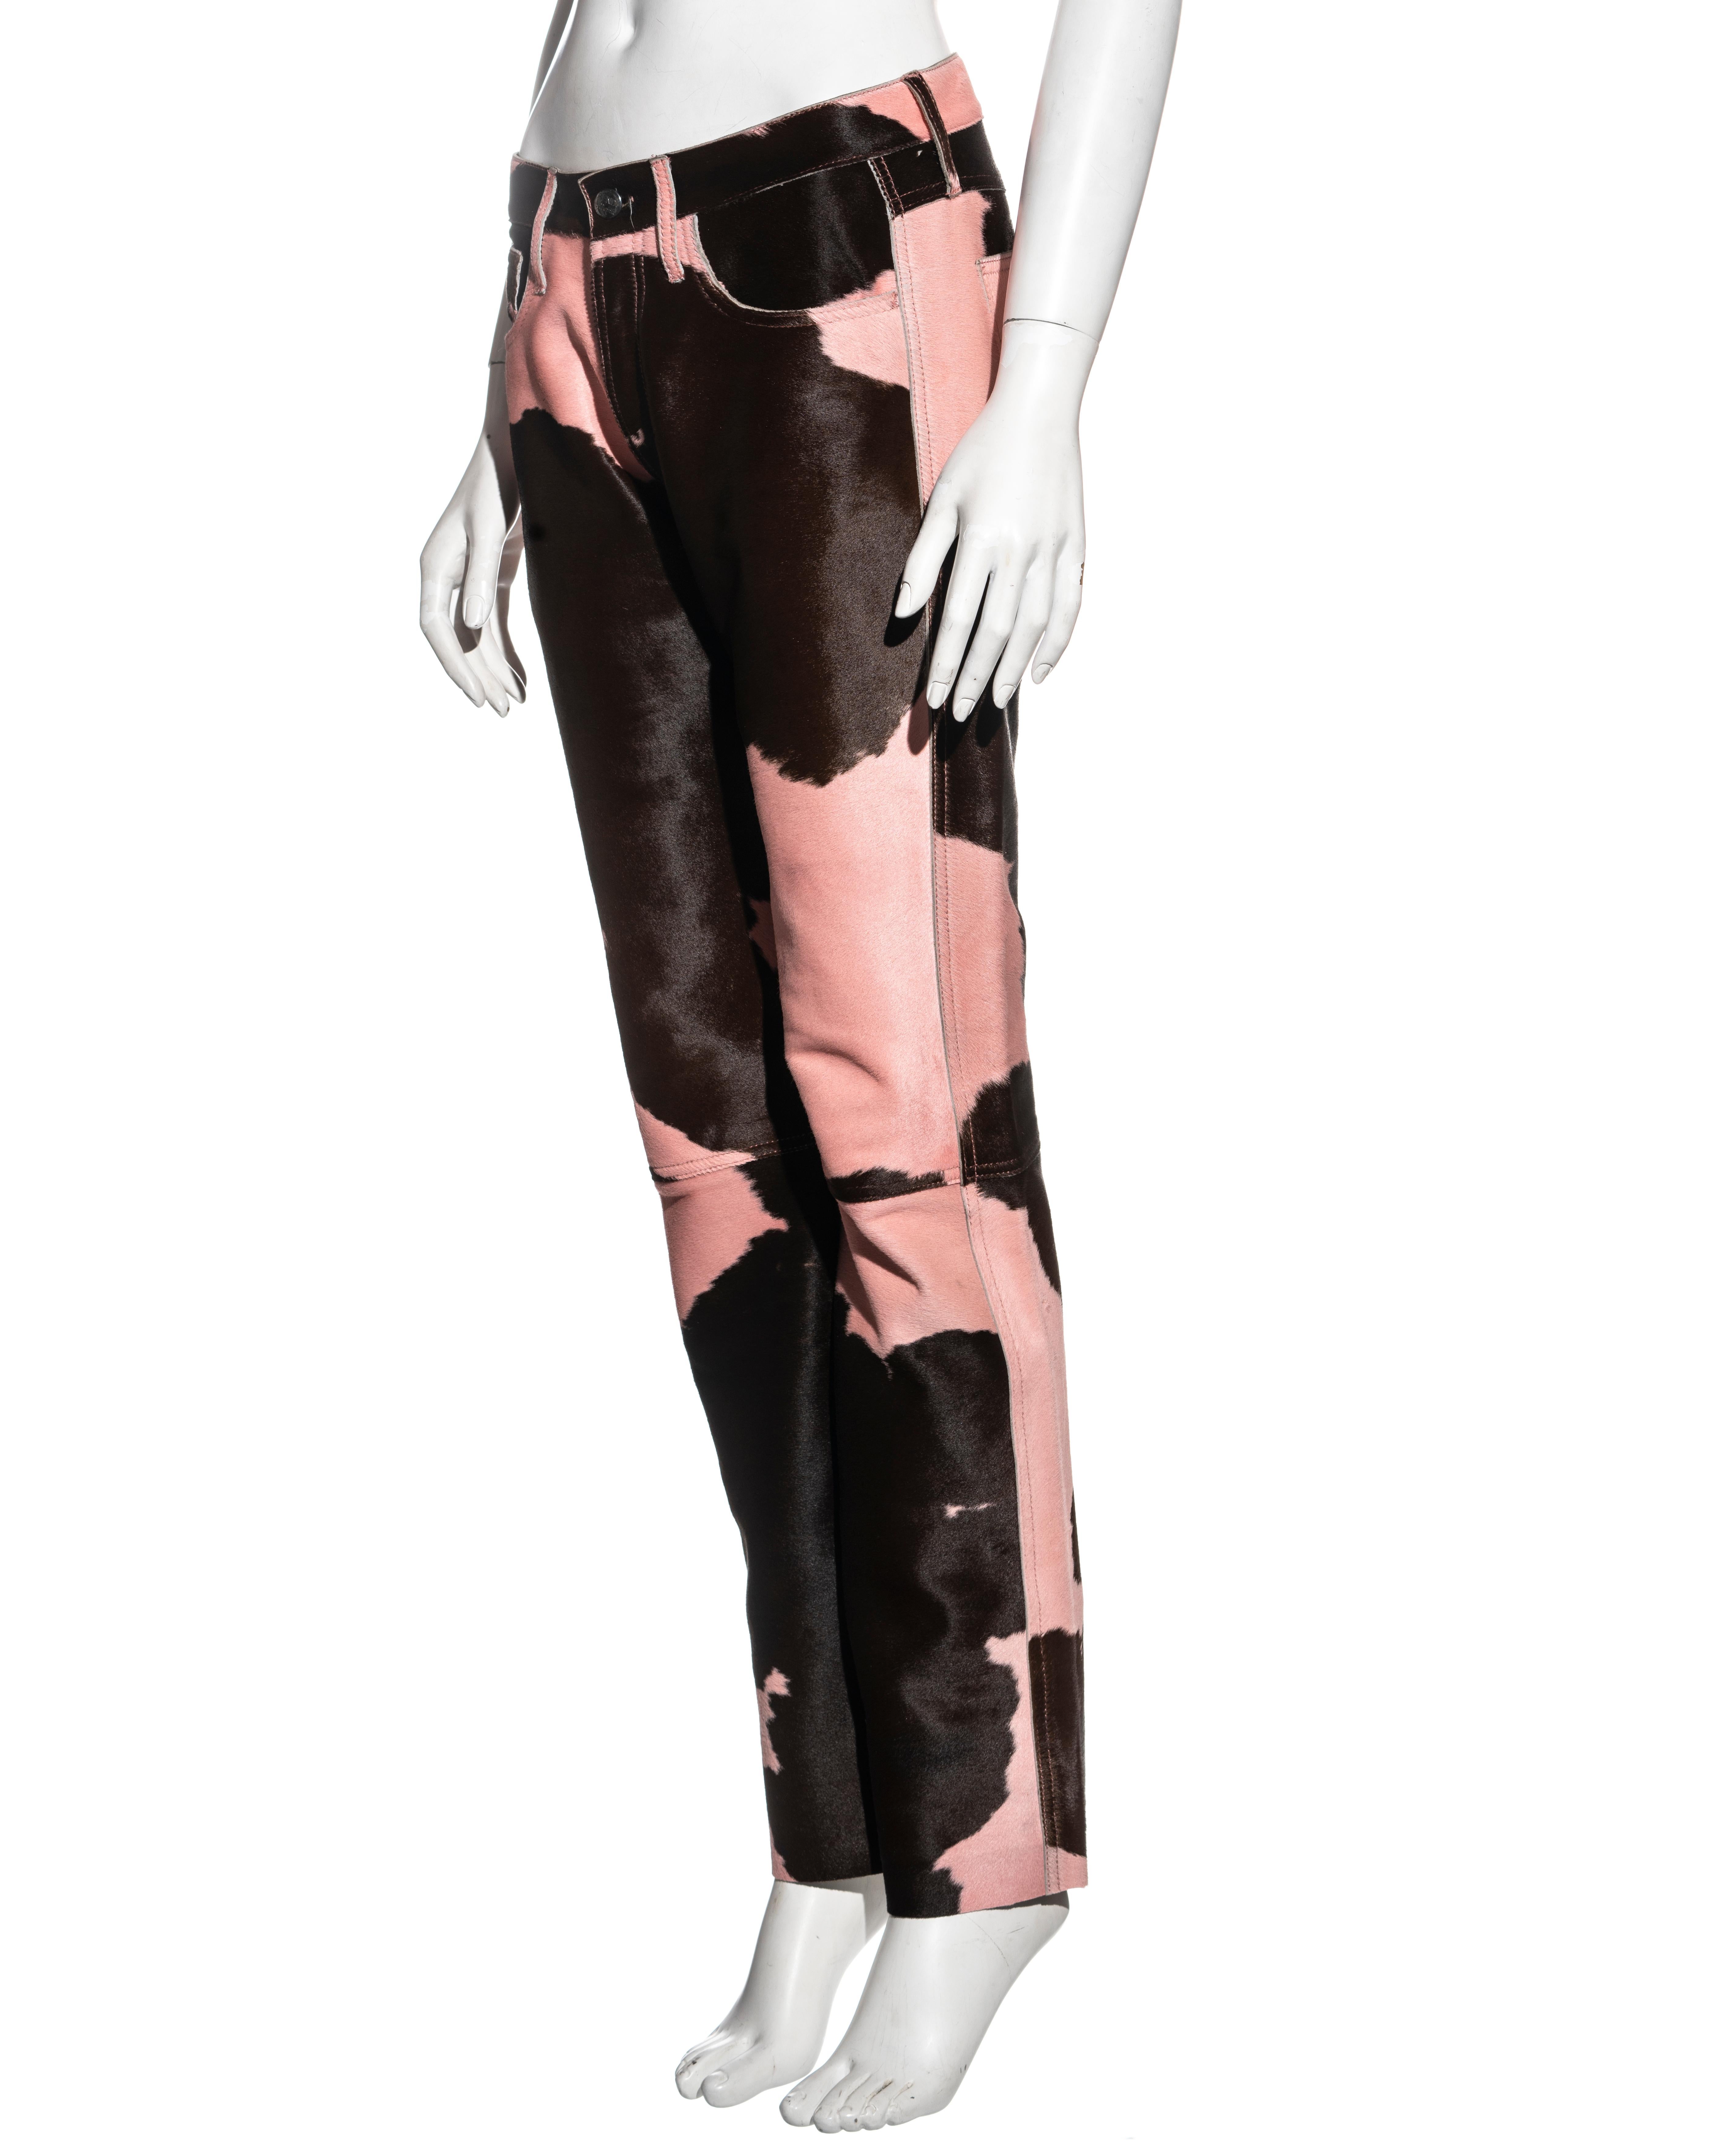 Women's Fendi by Karl Lagerfeld pink and brown cowhide baguette and pants set, fw 1999